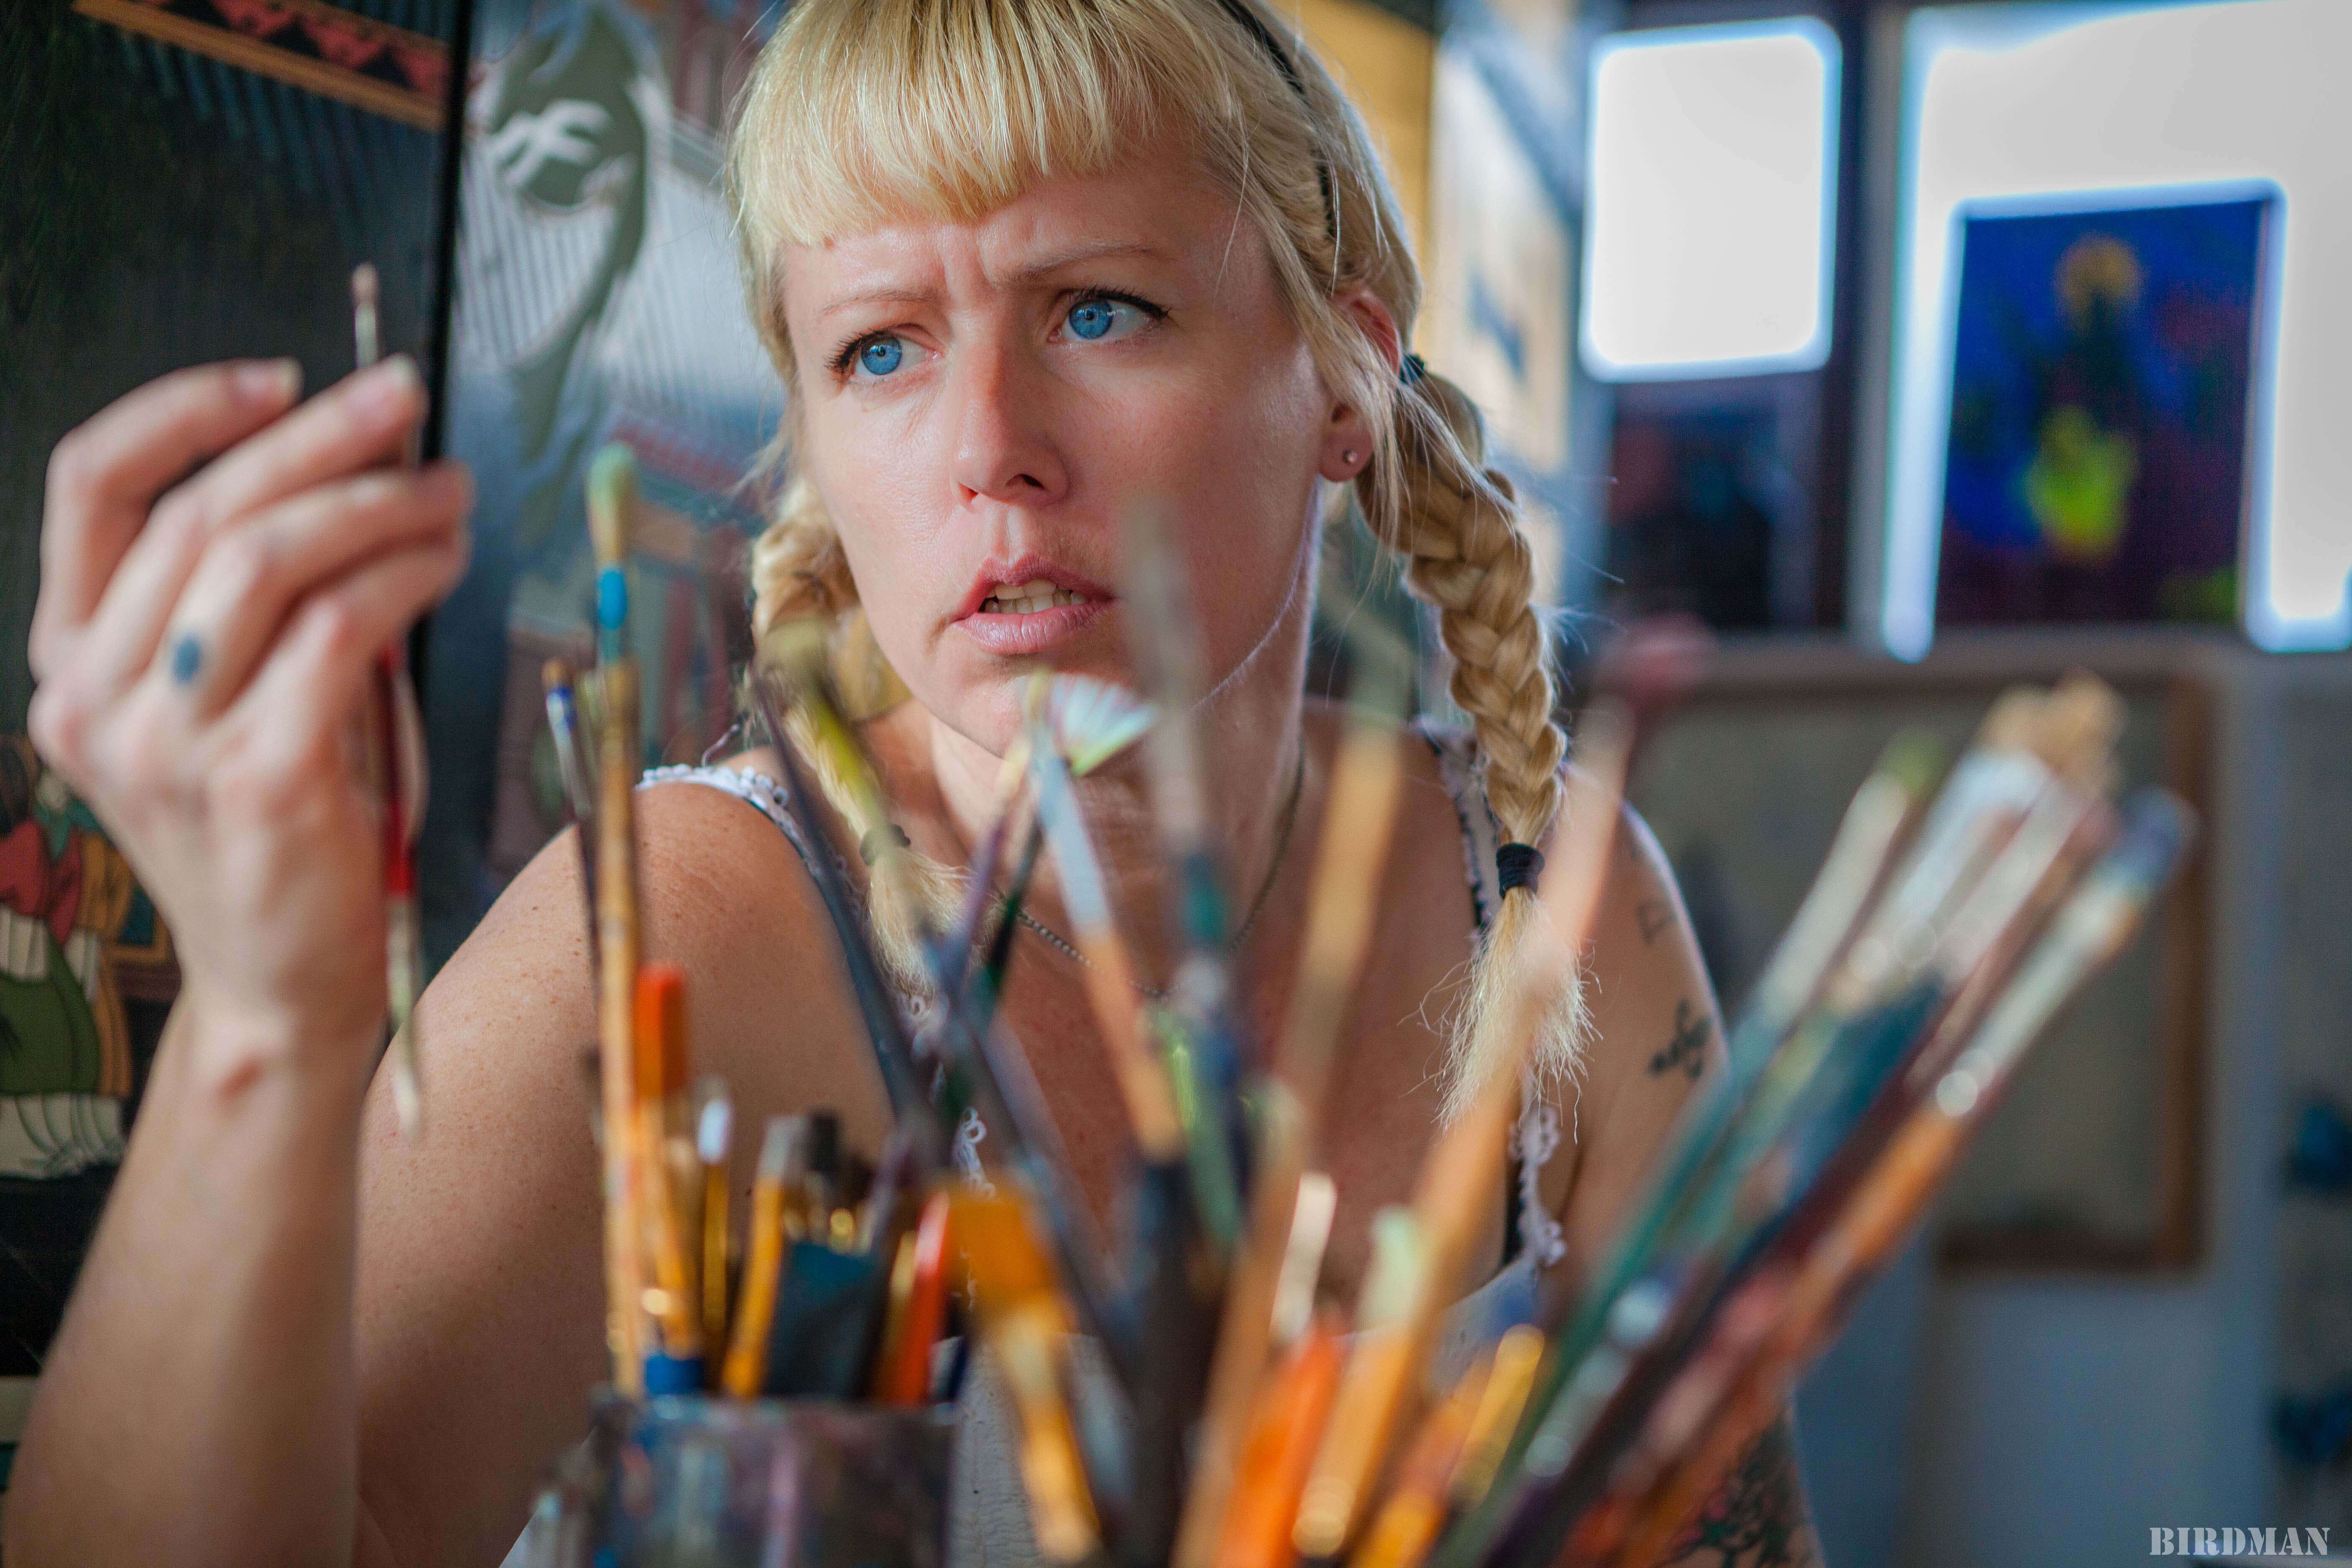 Lydia Emily from the chest up sitting behind many paintbrushes in cups, staring with furrowed brows at a brush in her hand.